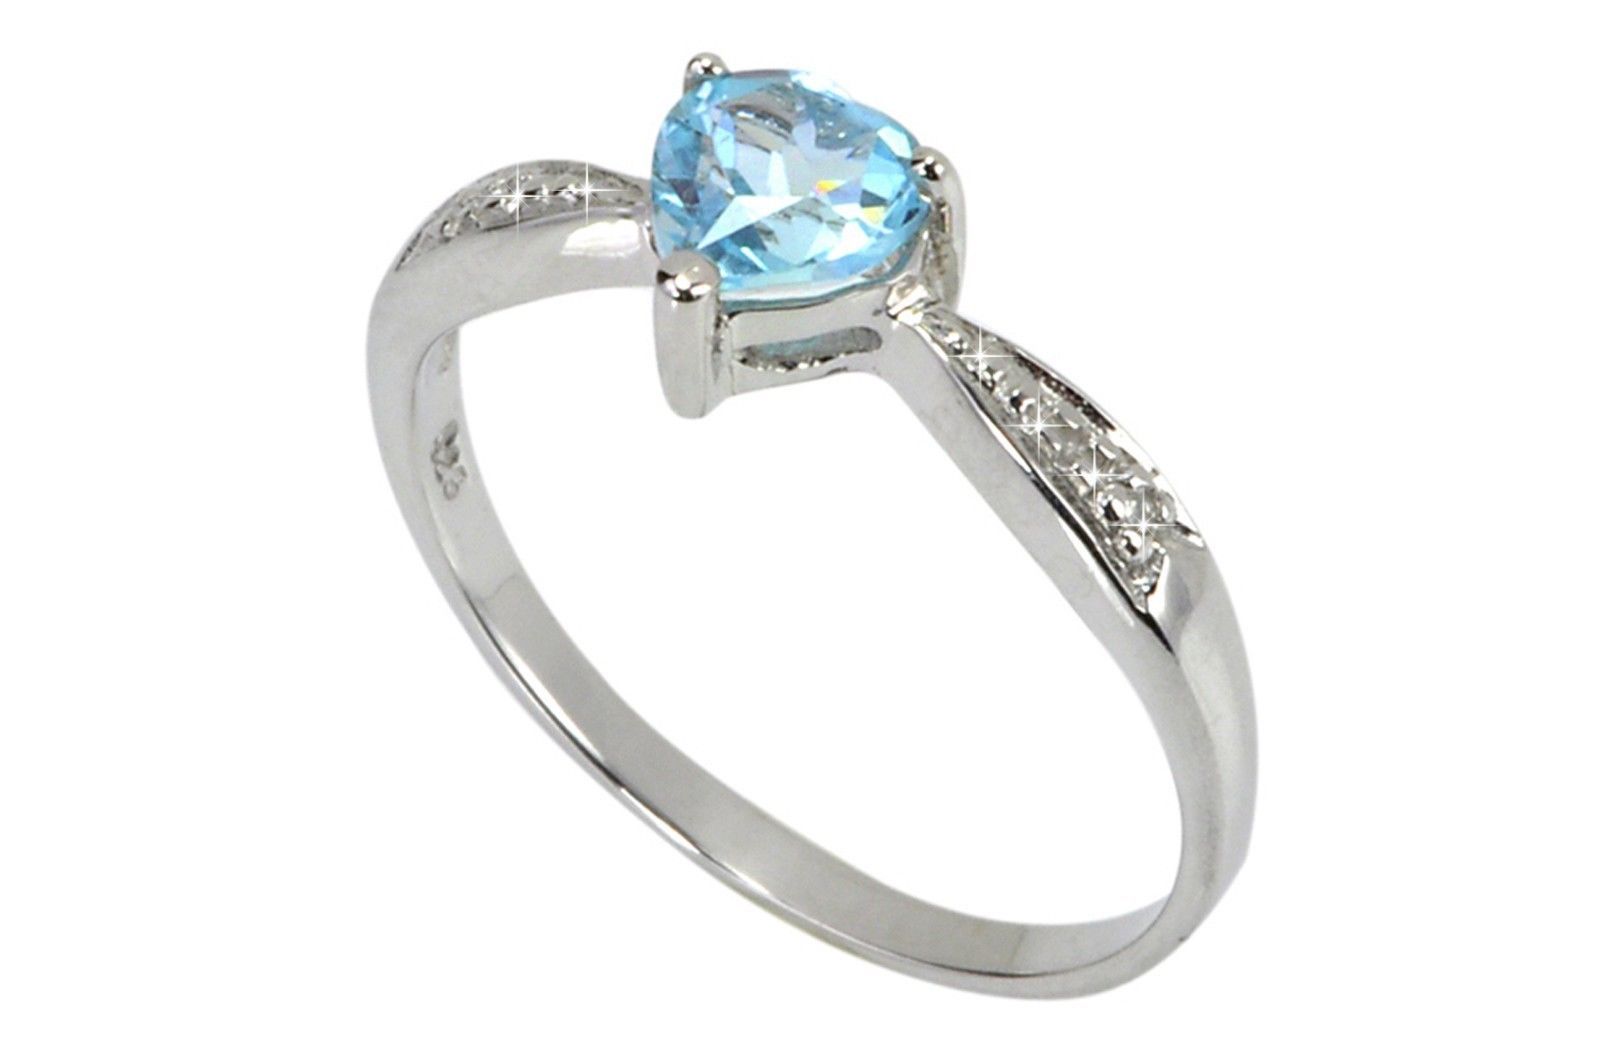 Primary image for Diamond Heart Ring .925 Silver .5ct Blue Topaz Center Stone